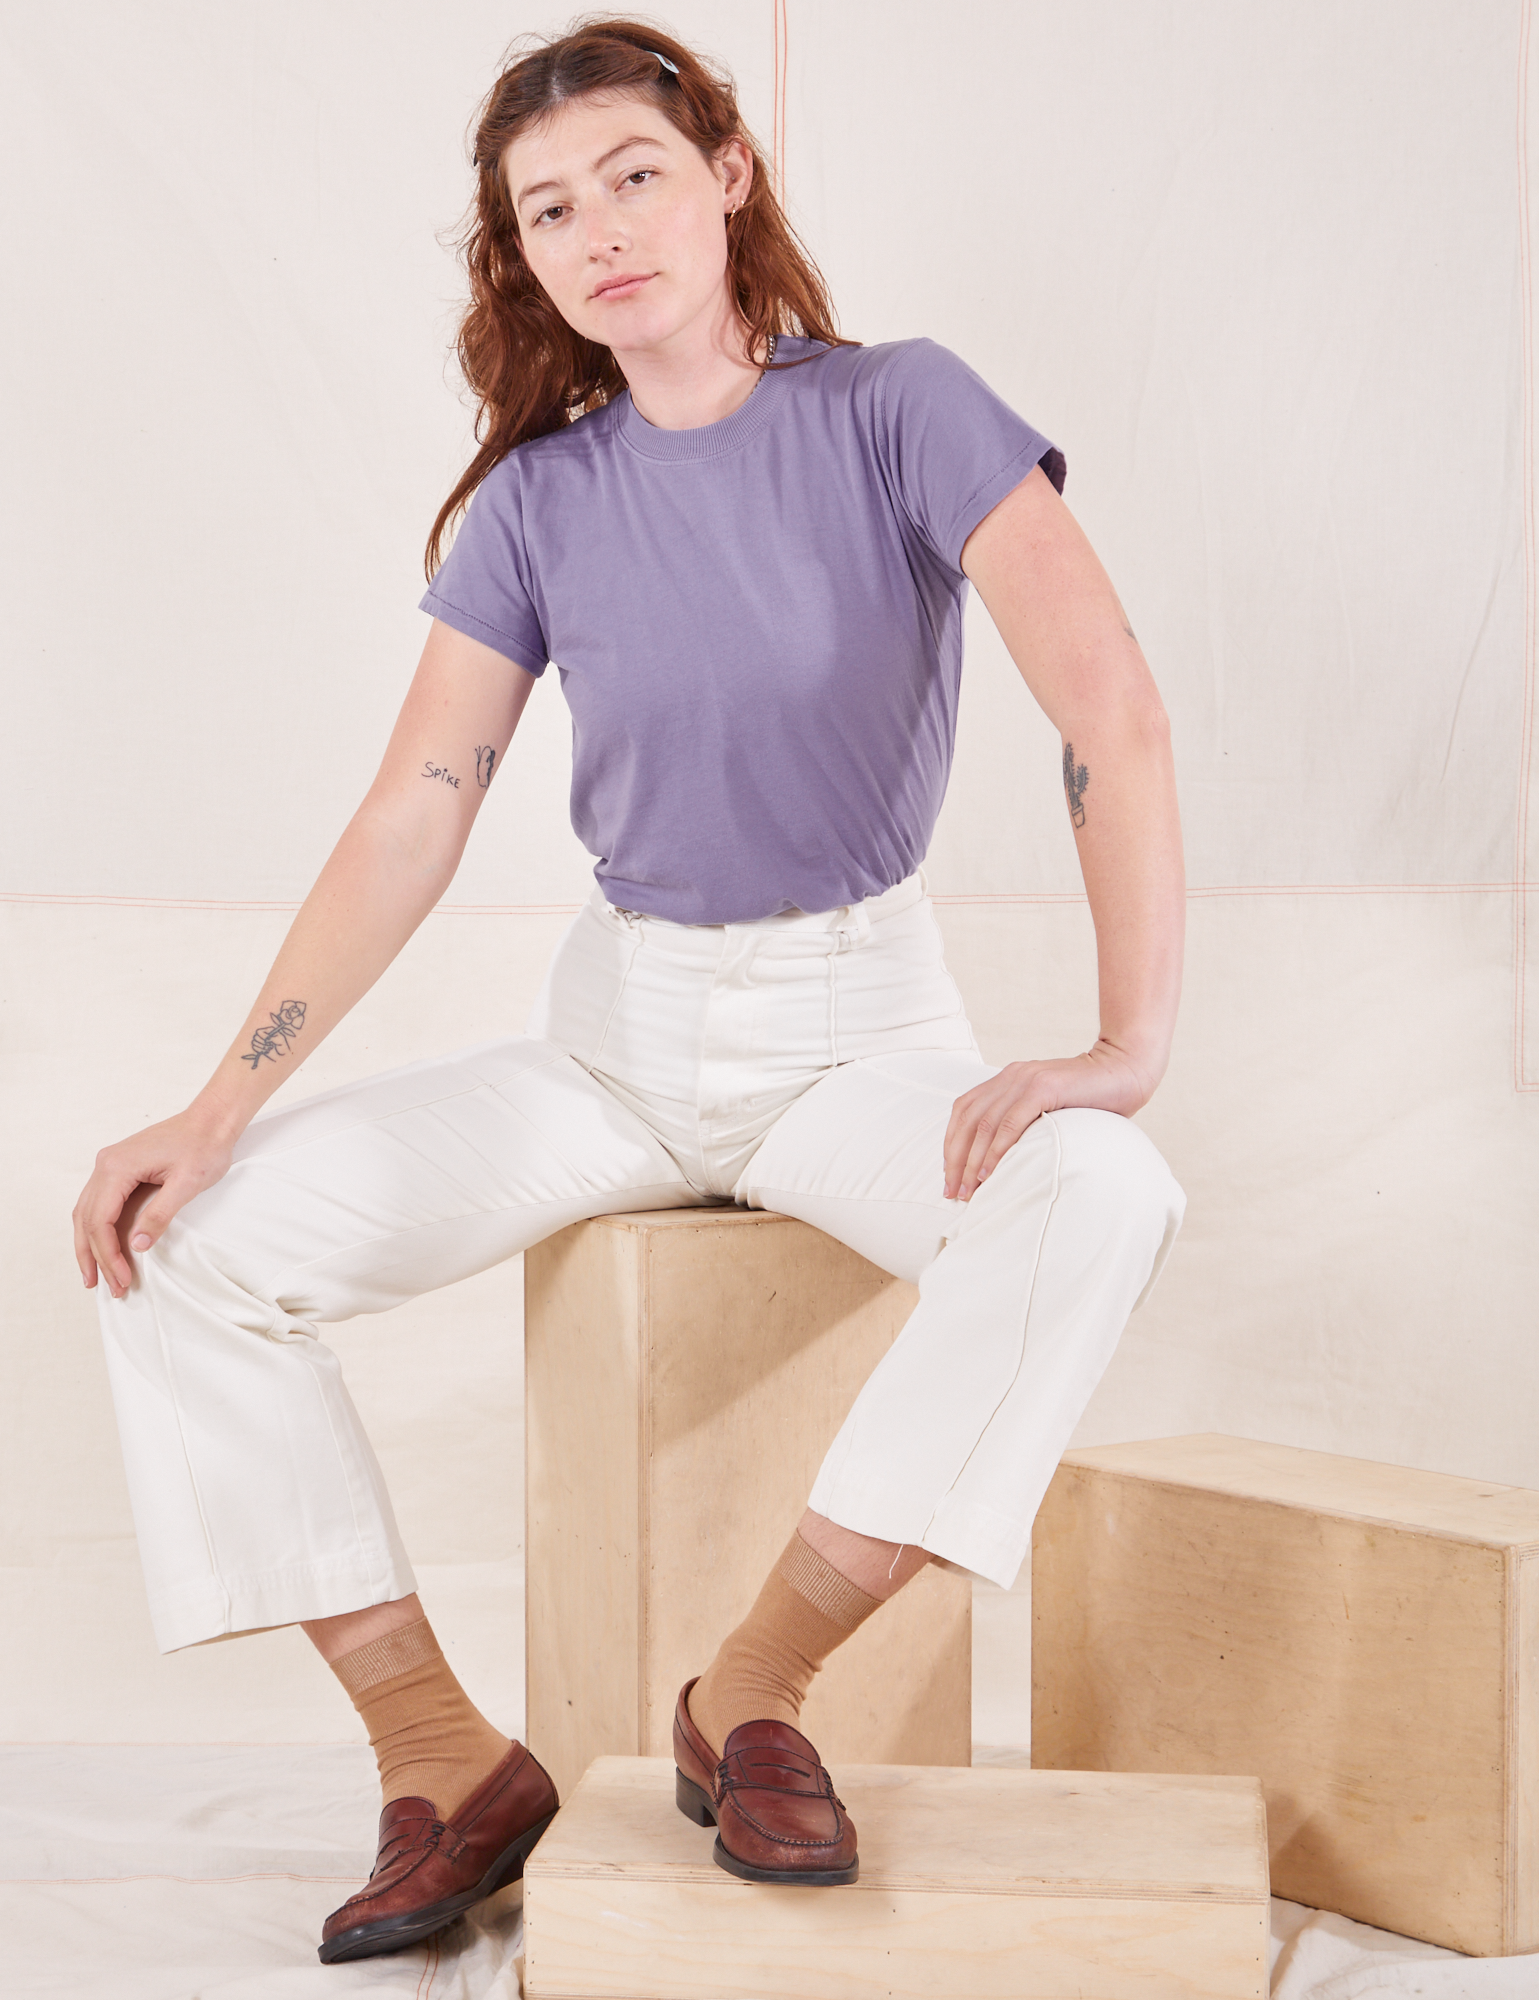 Alex is wearing Organic Vintage Tee in Faded Grape and vintage off-white Western Pants